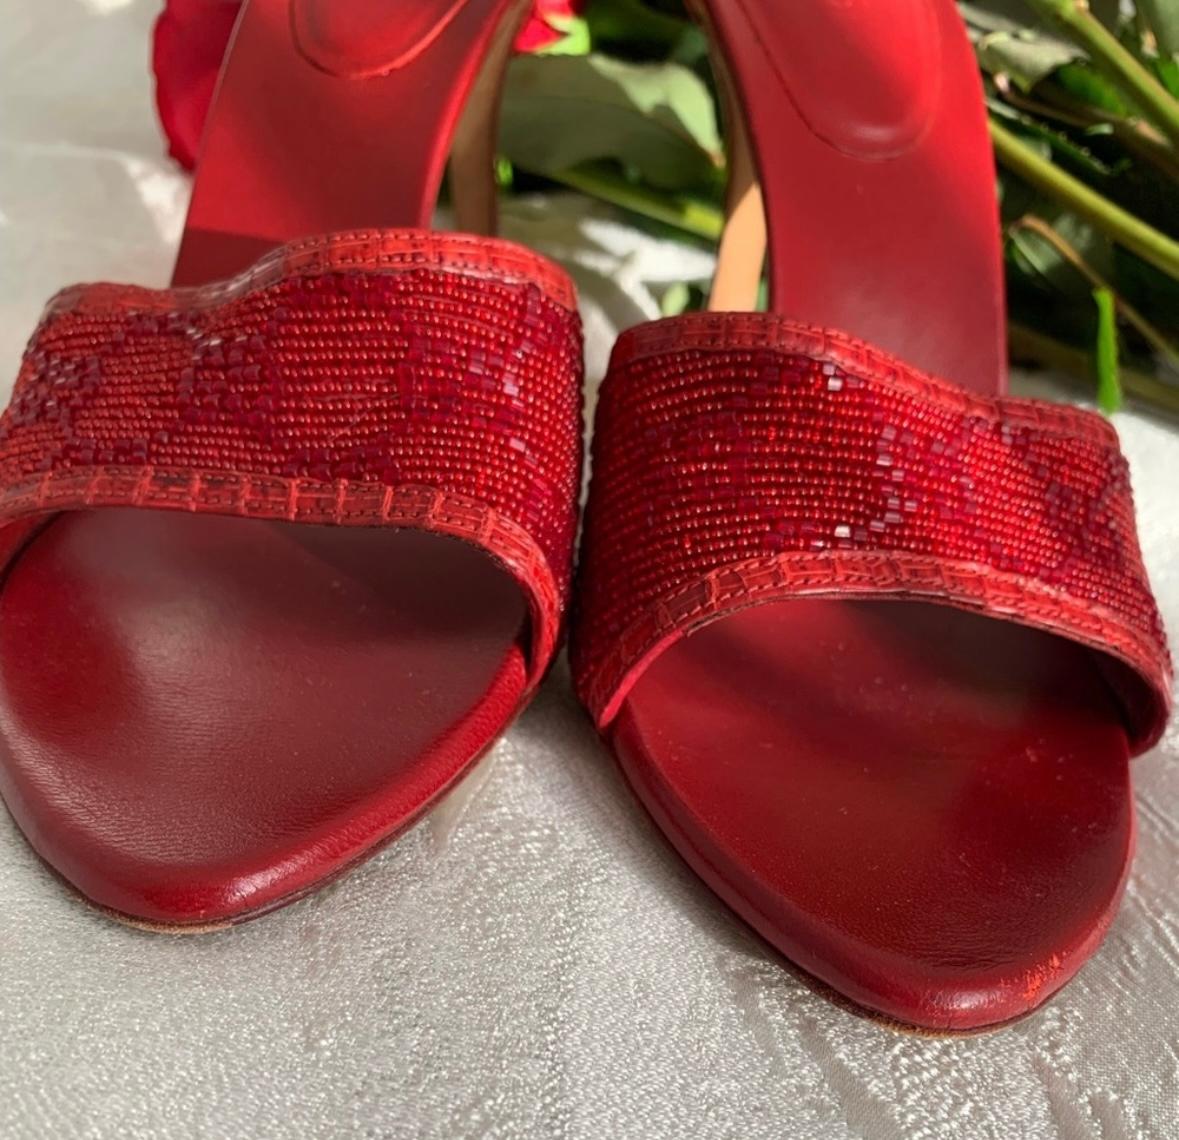 Gucci Tom Ford red beaded GG heels In Good Condition For Sale In Annandale, VA